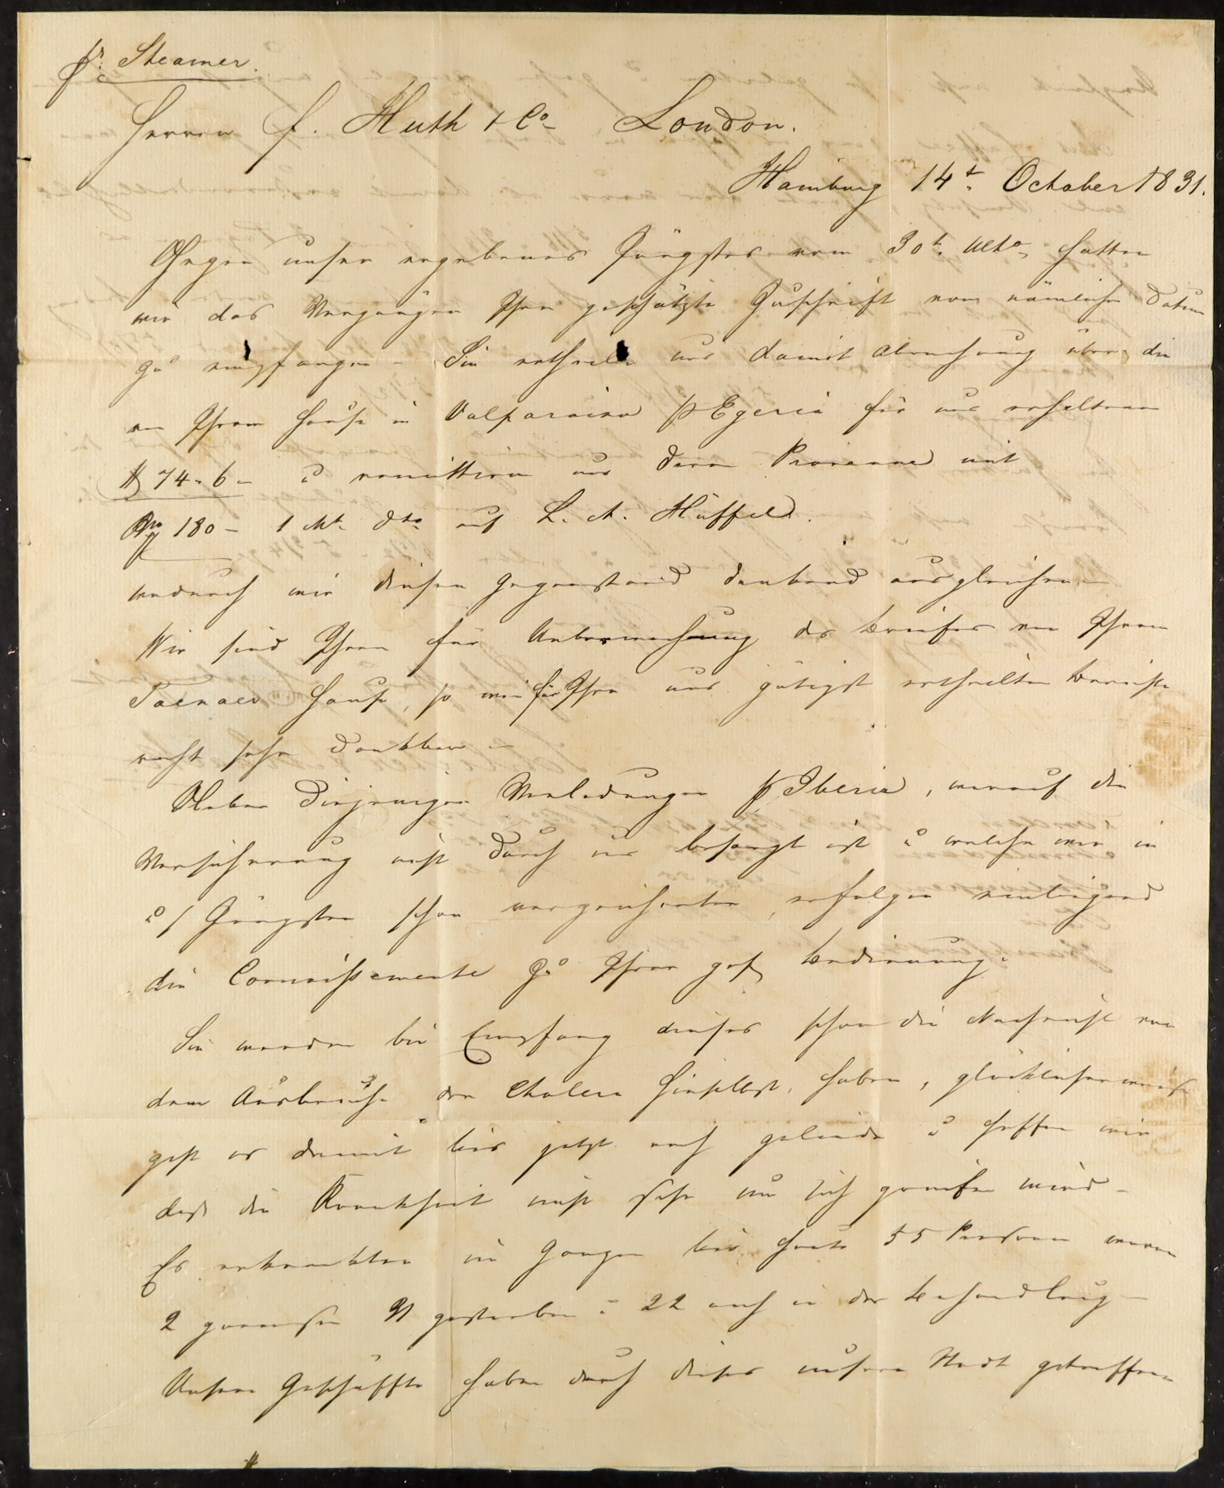 GB.PRE - STAMP 1831 QUEENBOROUGH SHIP LETTER (October) entire letter Hamburg to Huth in London, - Image 3 of 5